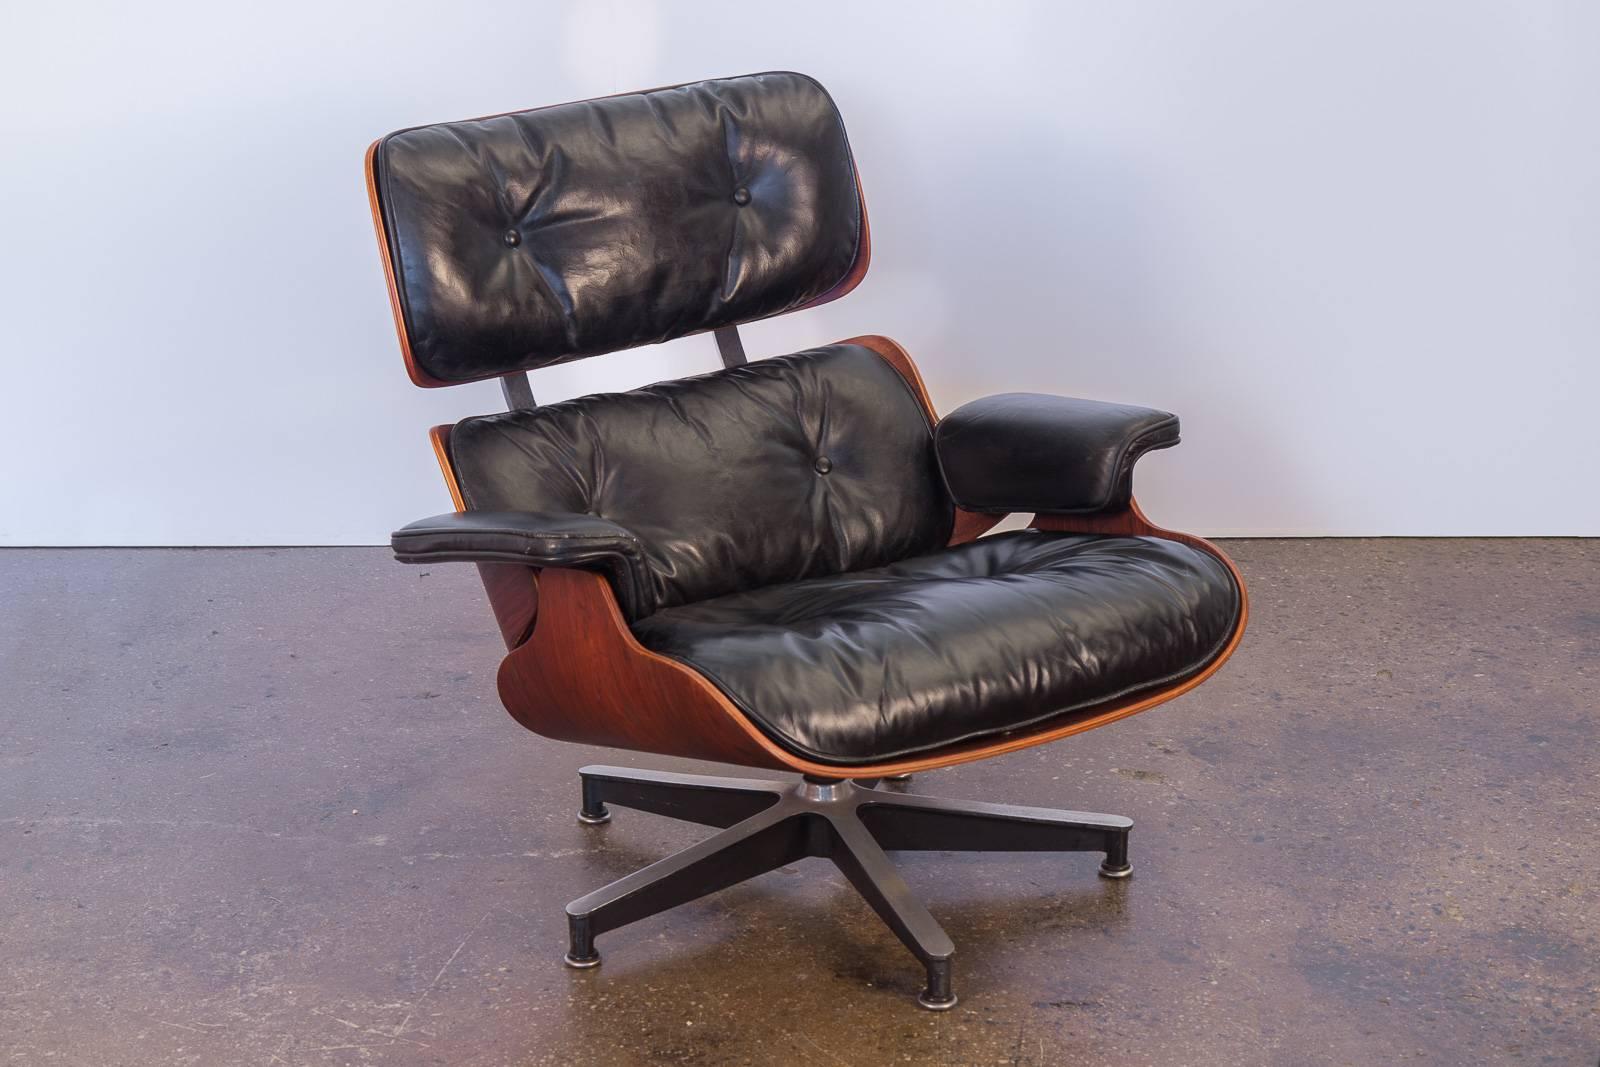 Vintage 670 Eames lounge chair and matching 671 ottoman by Charles and Ray Eames for Herman Miller. A supremely cozy lounge chair. Original leather has age-appropriate wear but is pliable and soft. Visible crazing in the armrests and back cushions.